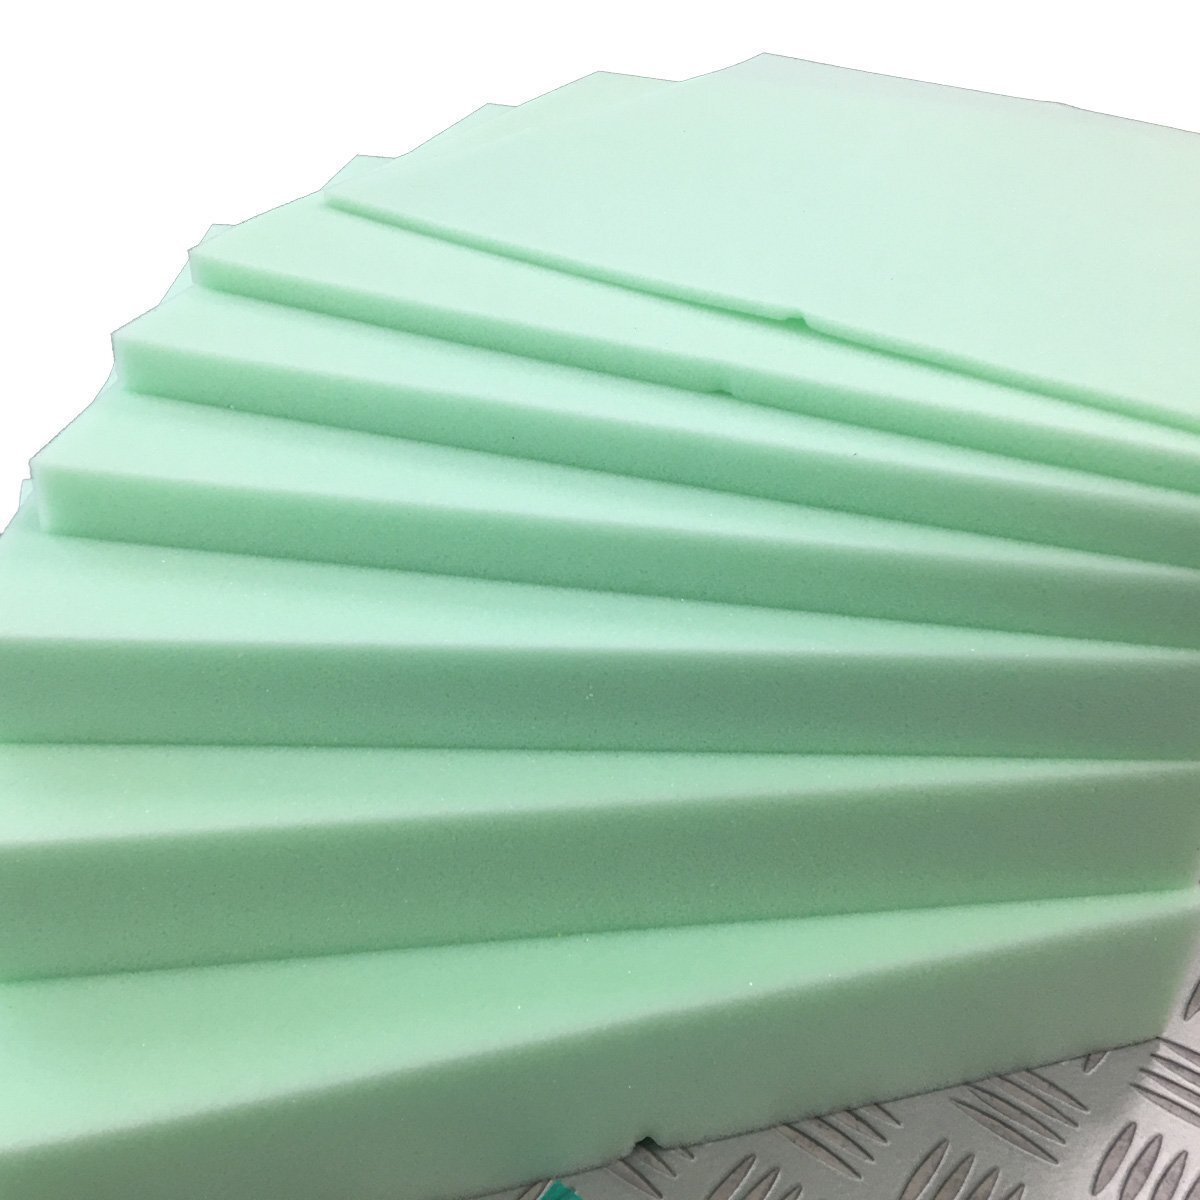  urethane foam [GL-50mm thickness ] hardness little hard width 1200x length 2000mm sponge / mat / seat repair / sleeping area in the vehicle for bed / camper 